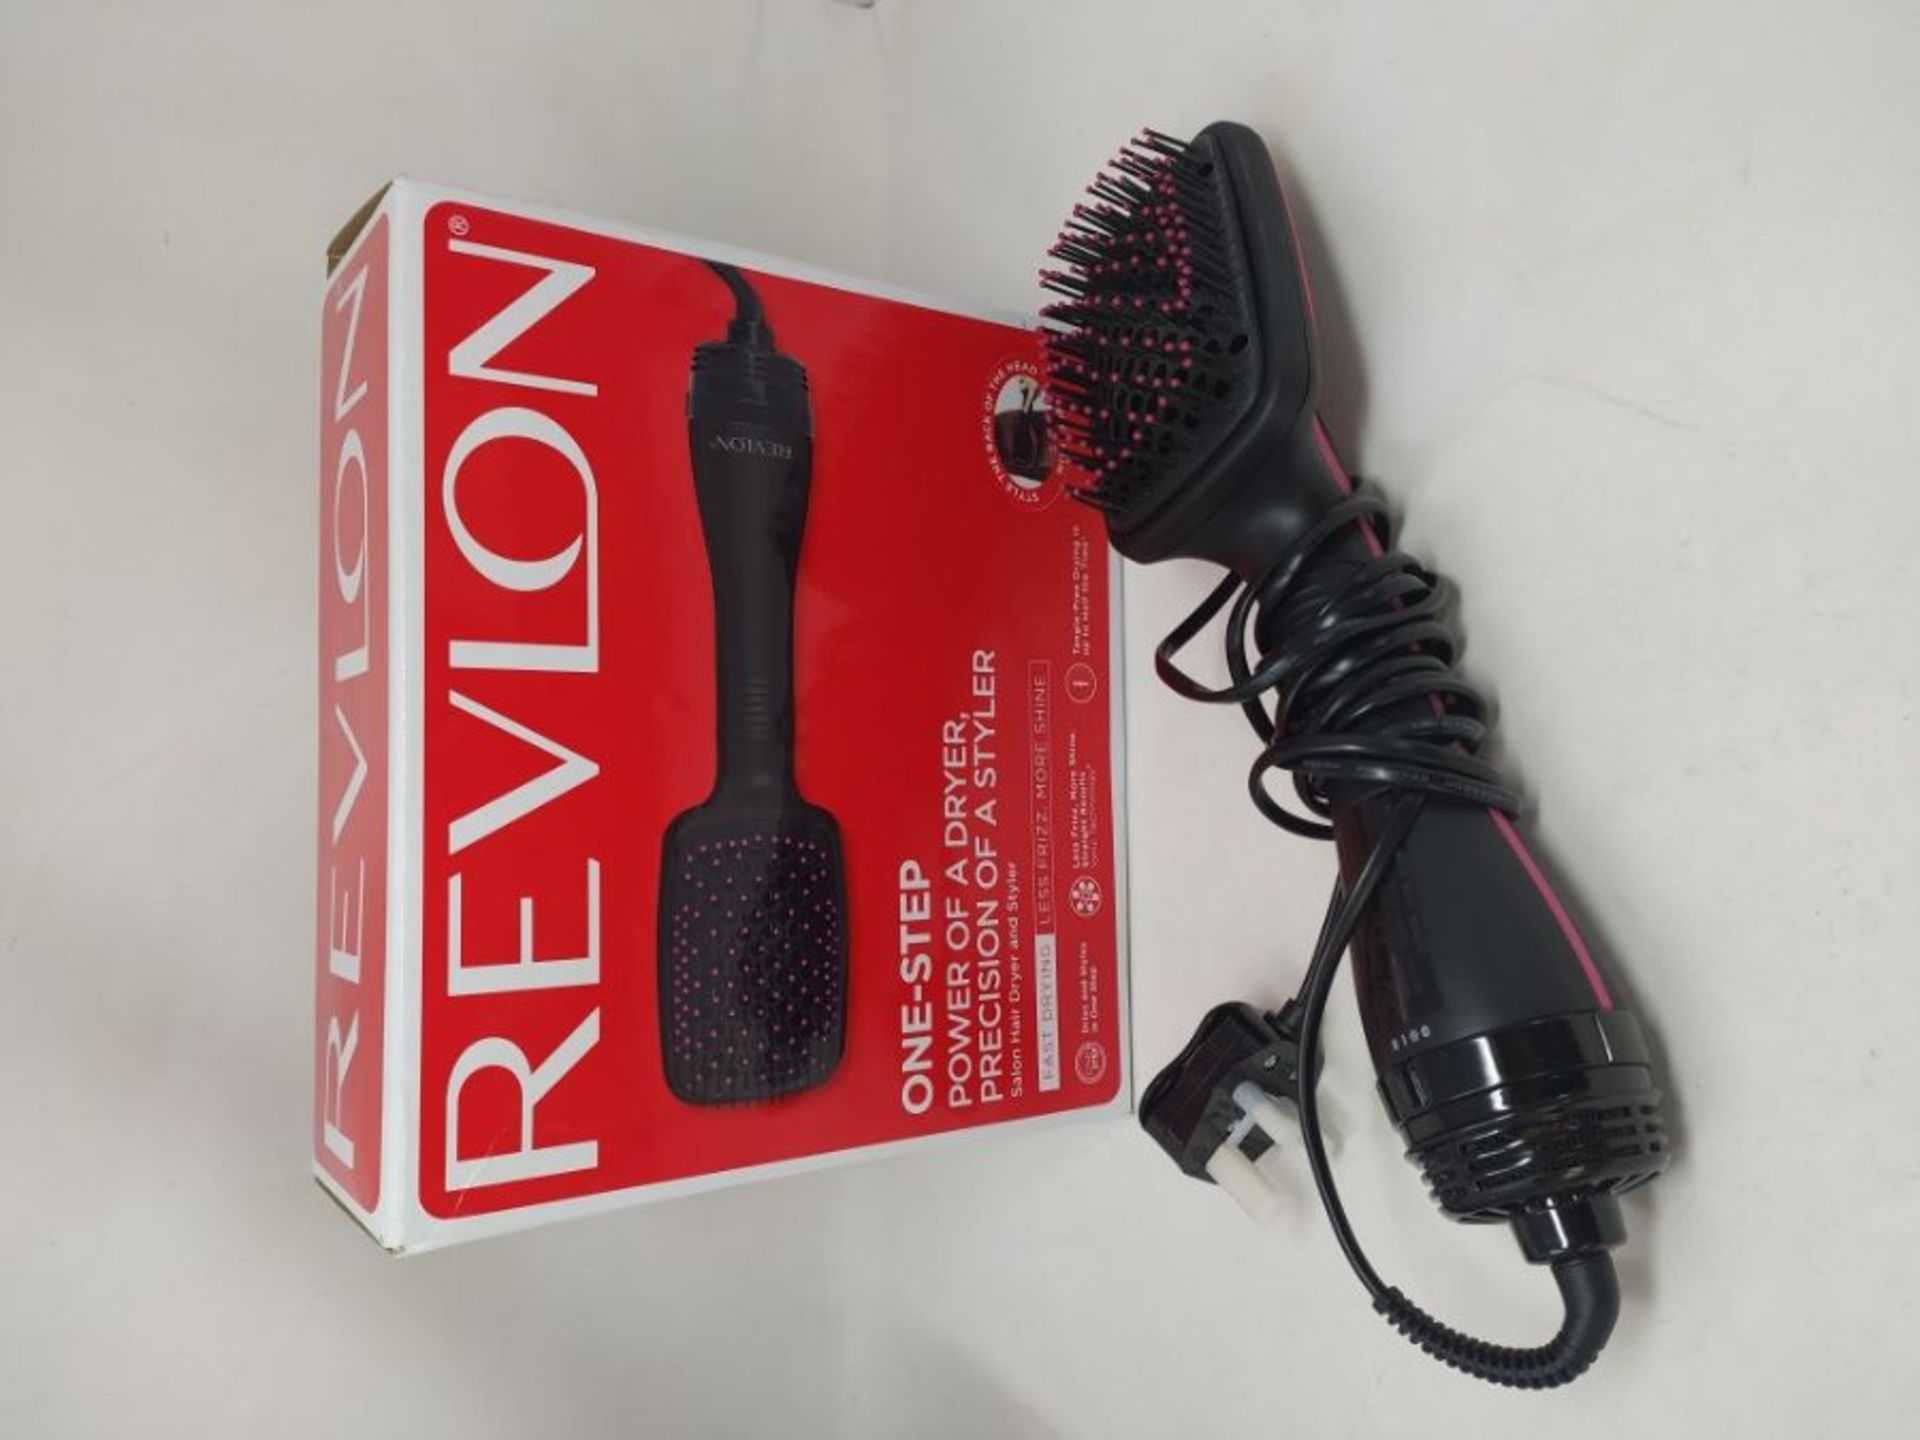 REVLON Pro Collection Salon One Step Hair Dryer and Styler - Image 2 of 2